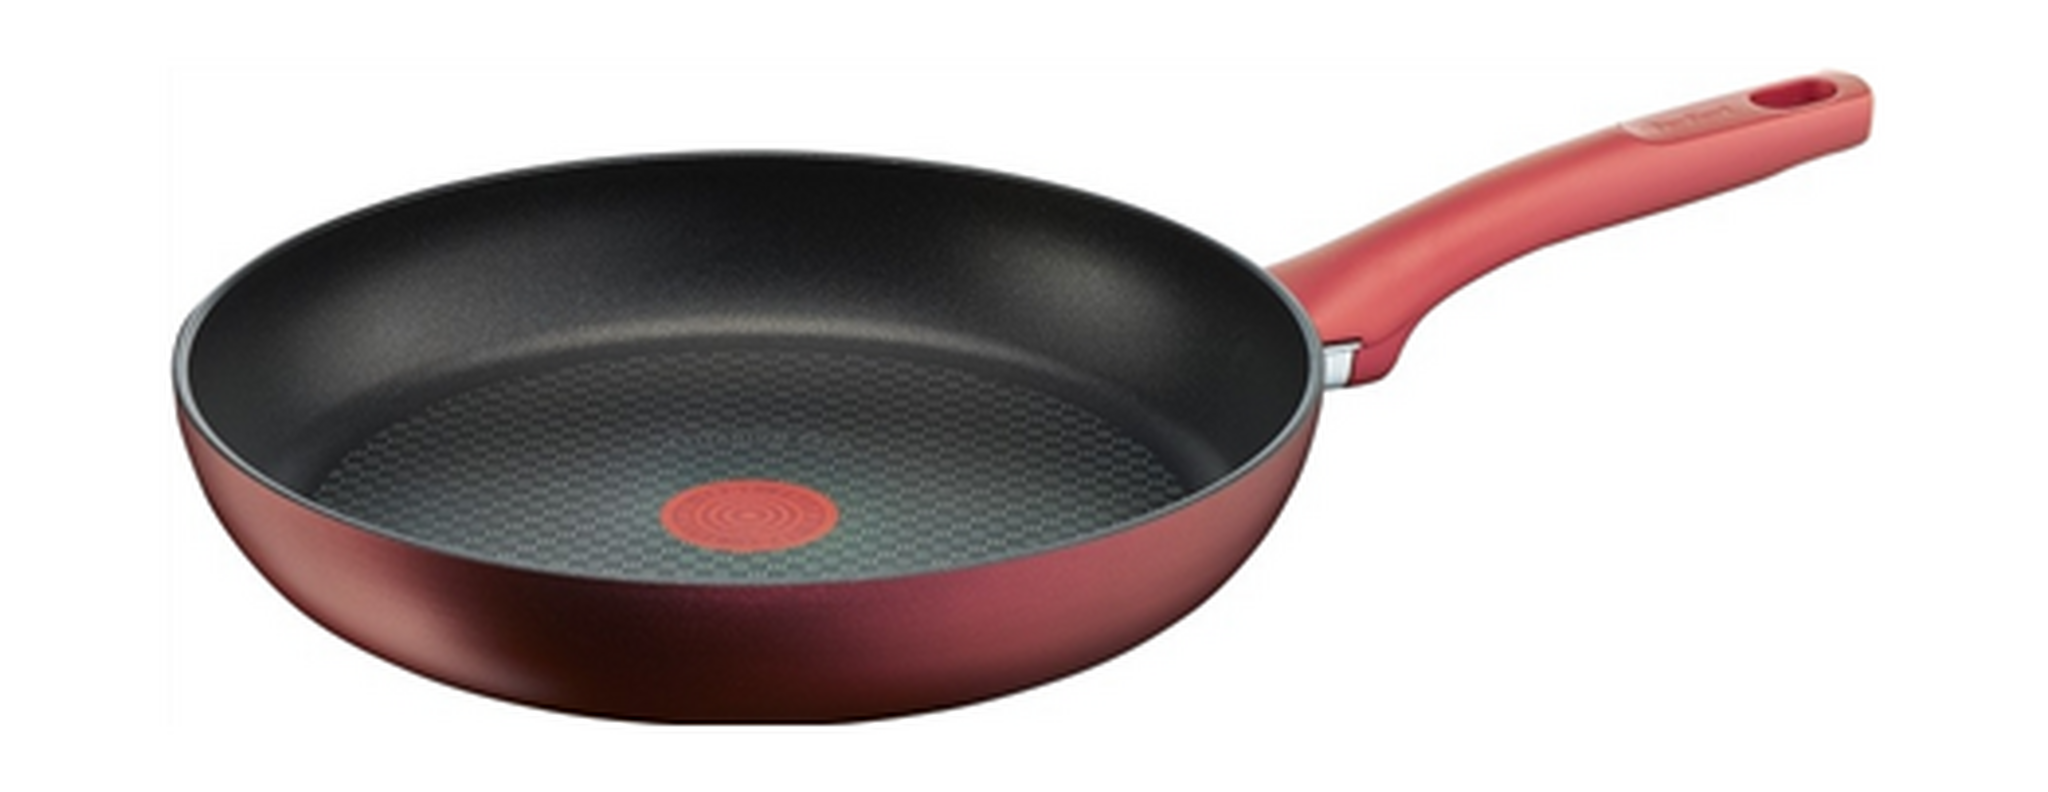 Tefal 21cm Character Frypan - Red